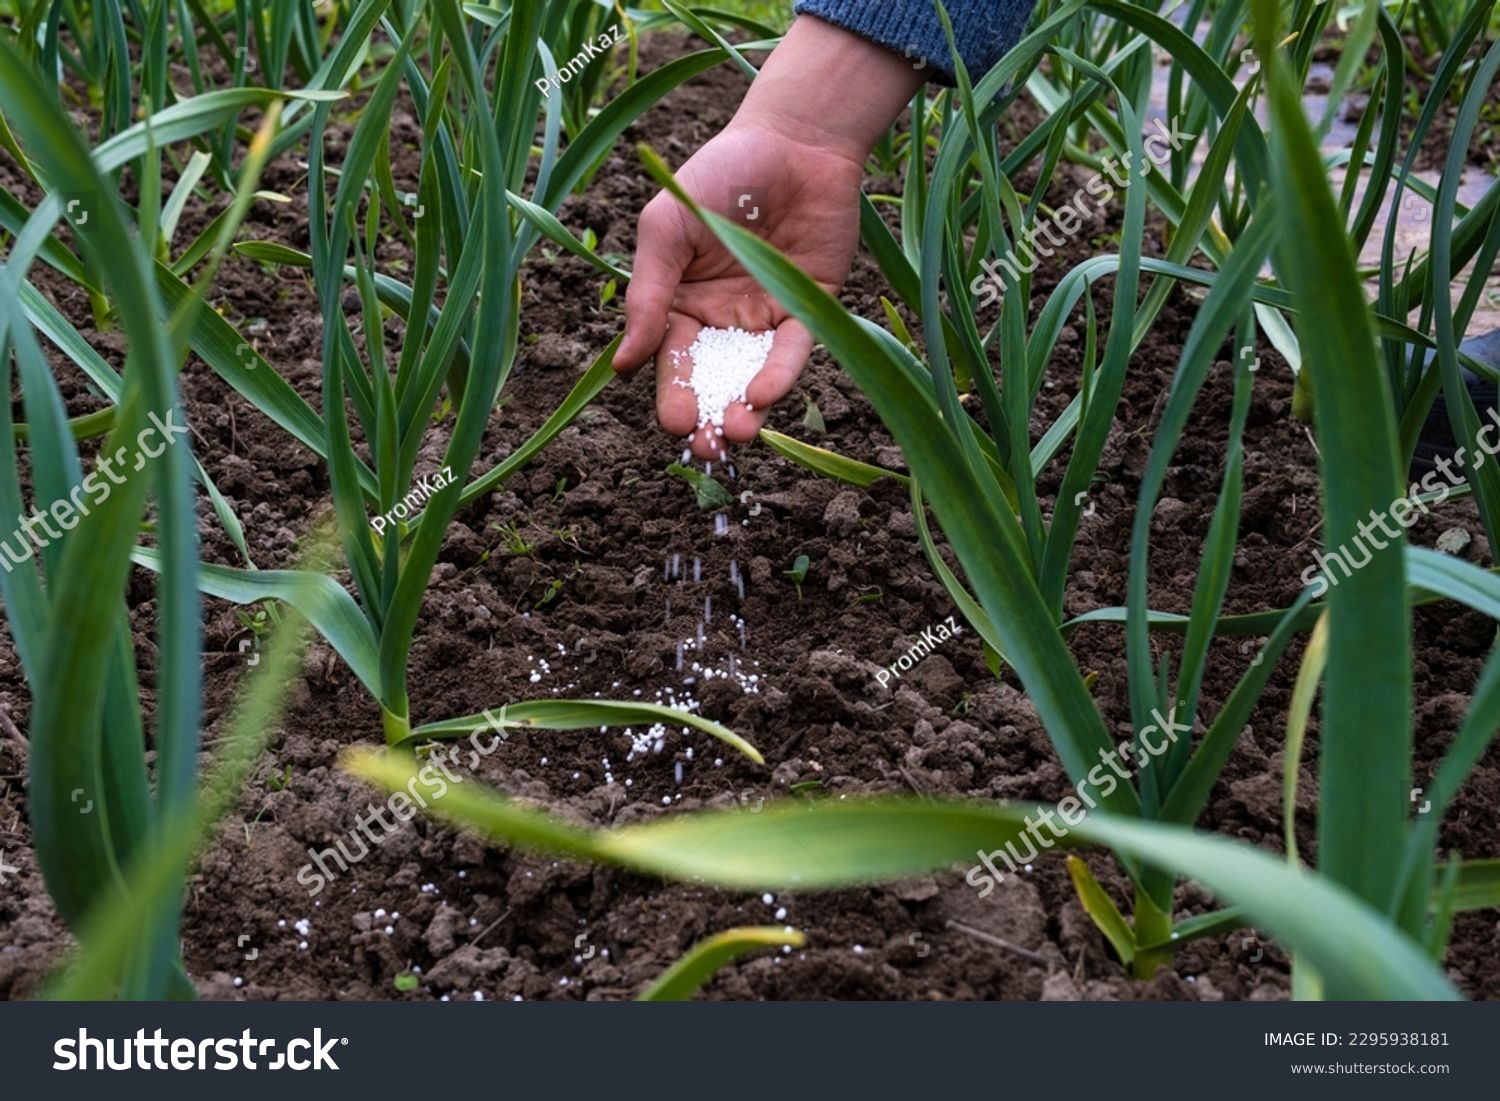 Bed of young winter garlic in the garden. Growing garlic using mineral fertilizers. A hand pours fertilizer into the aisle of garlic. #2295938181